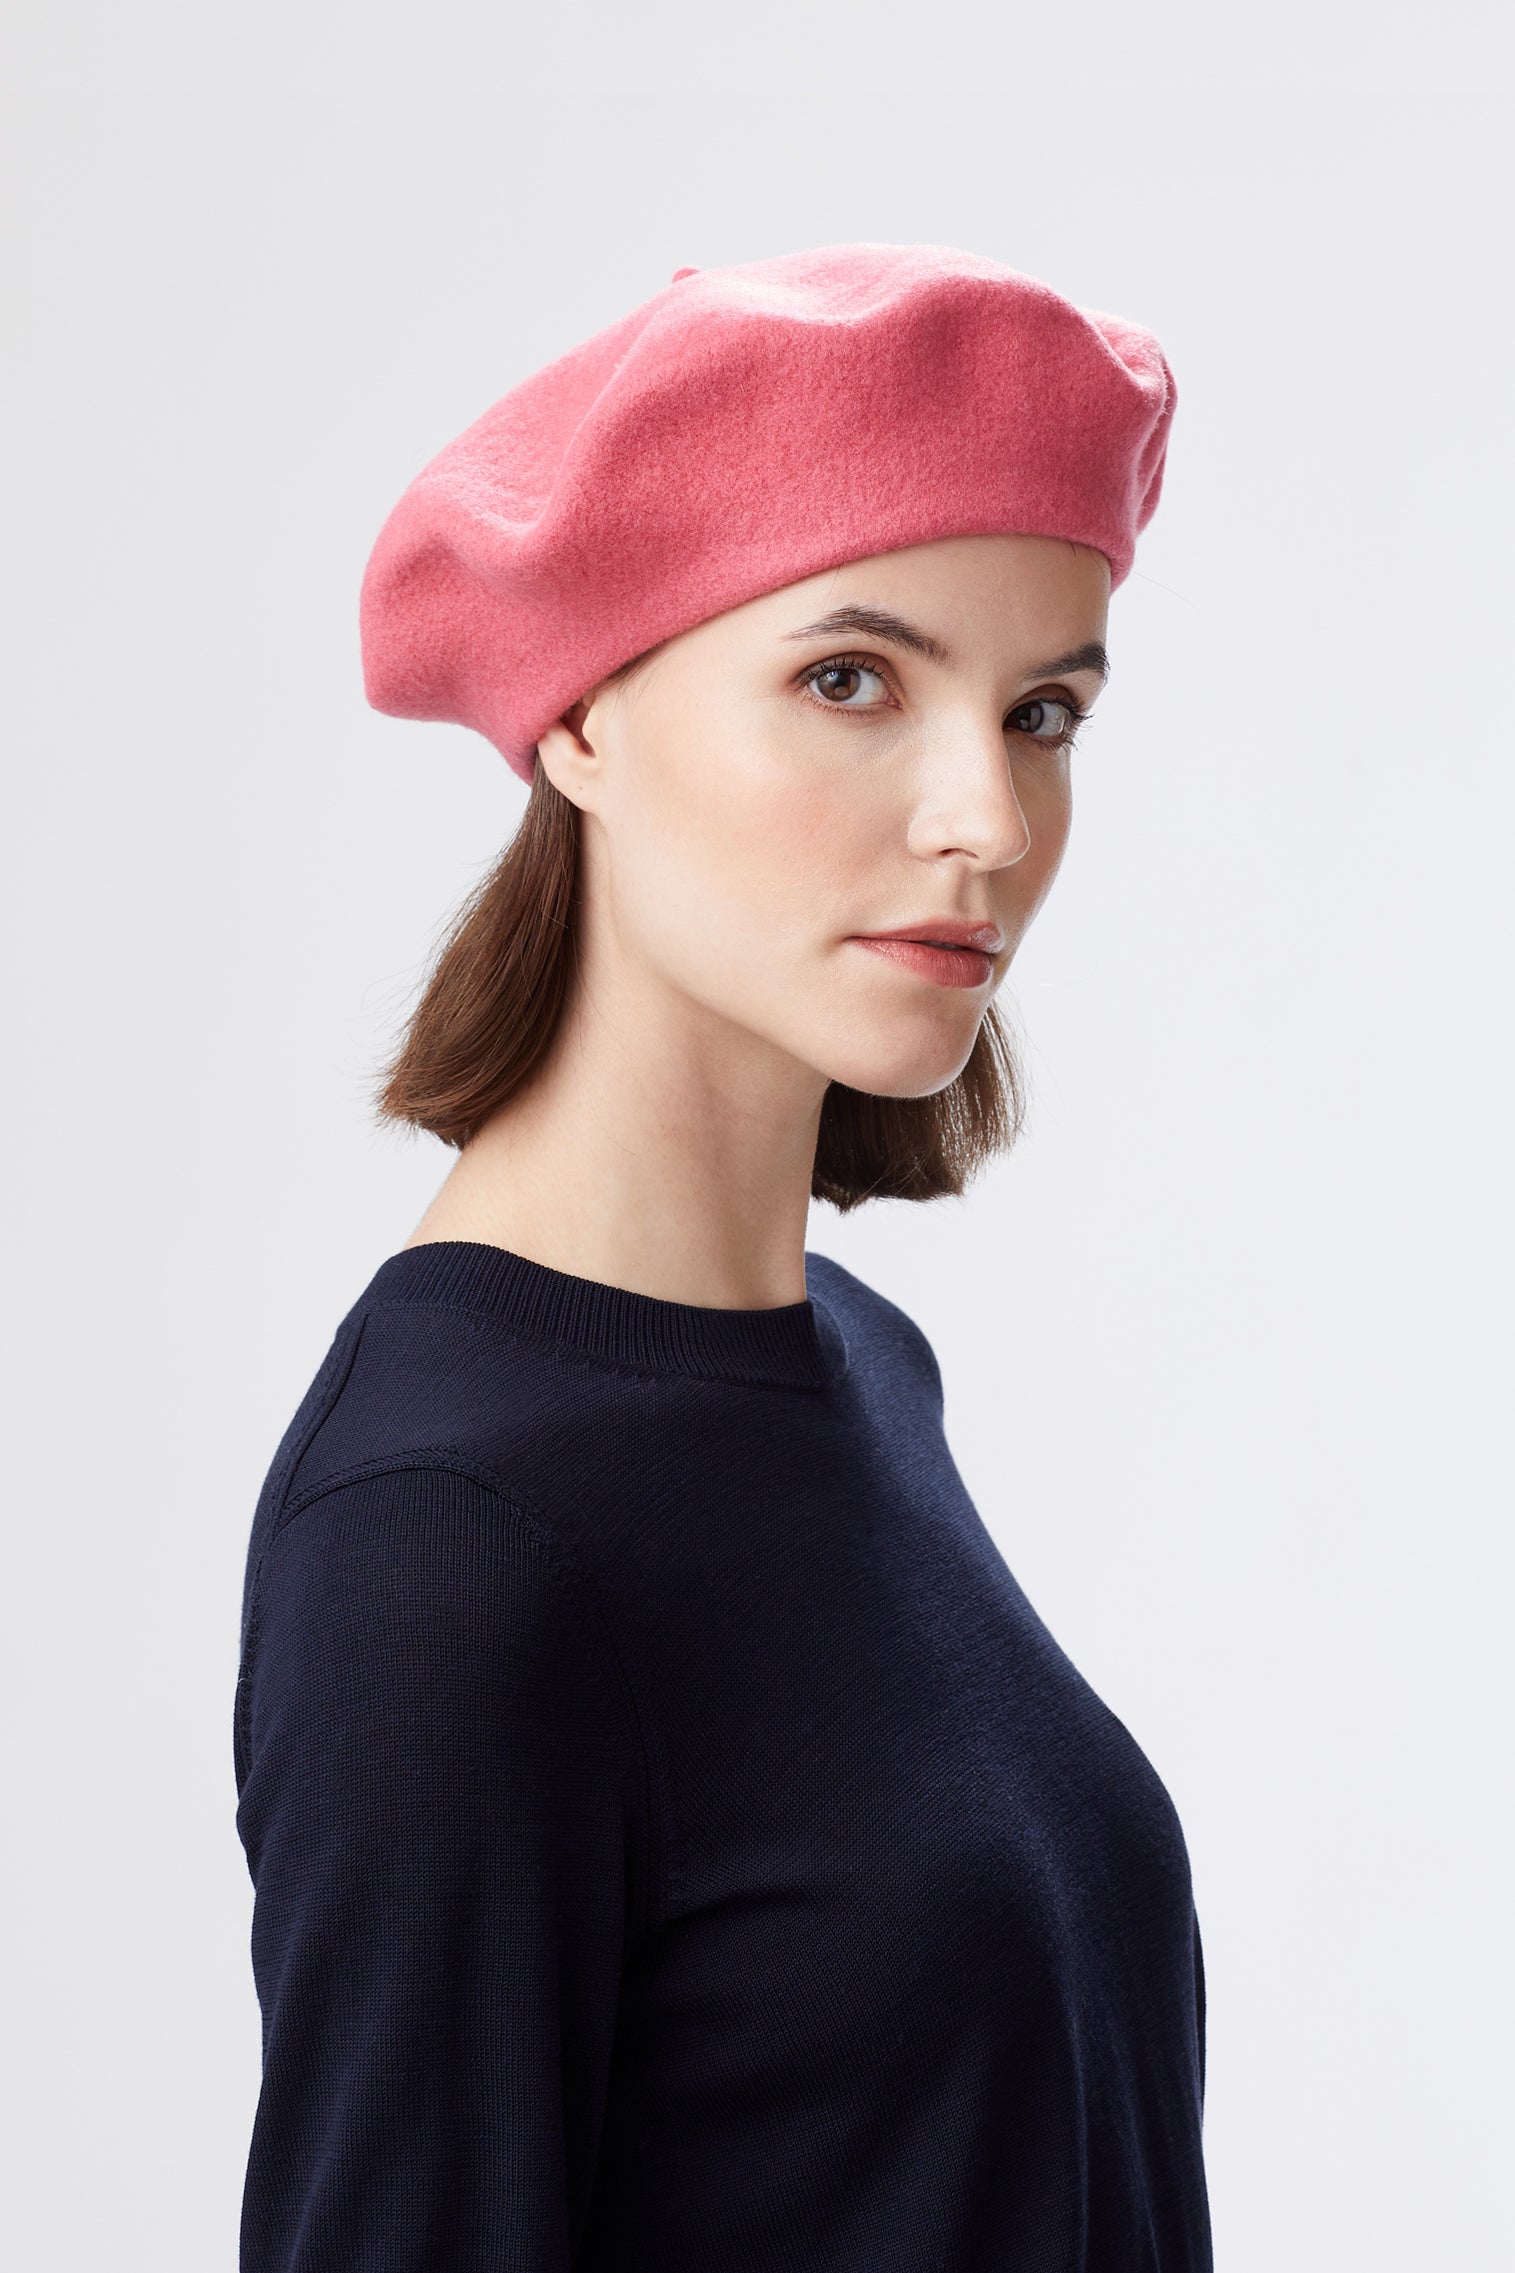 French Beret - Hats for Heart-shaped Face Shapes - Lock & Co. Hatters London UK